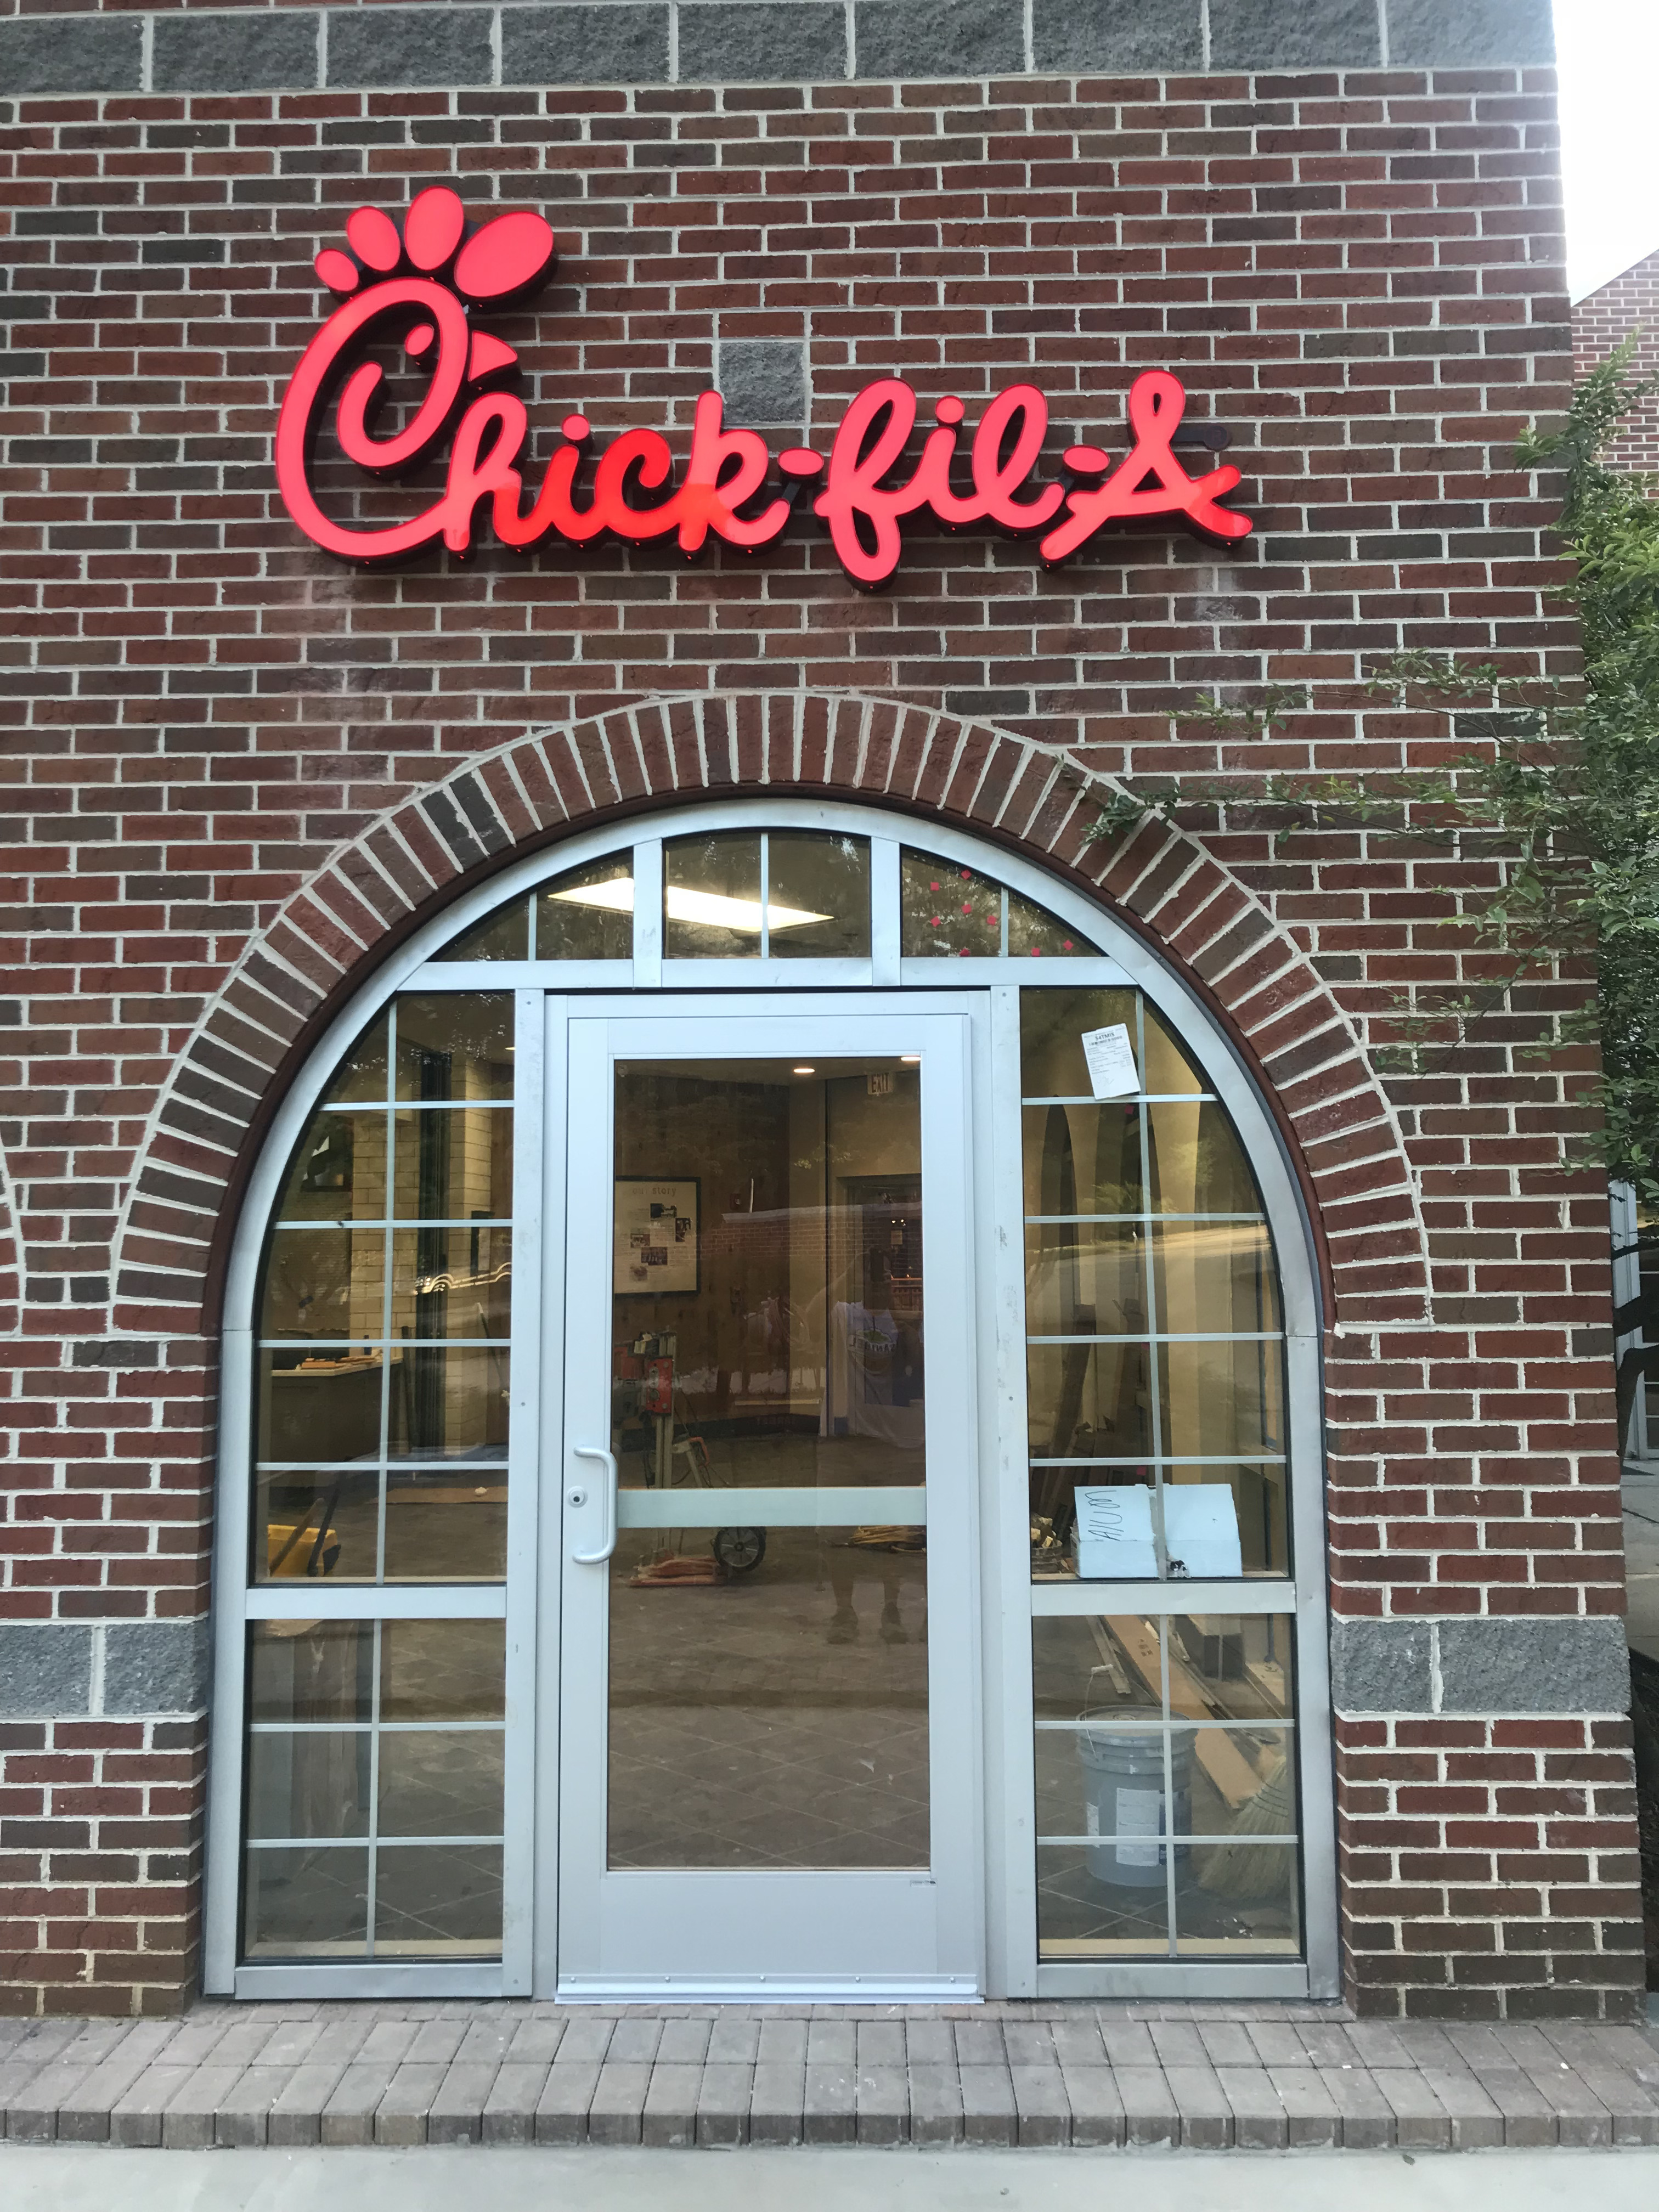 Commercial electrical installation and finish of Chick Fil A at Tusculum University